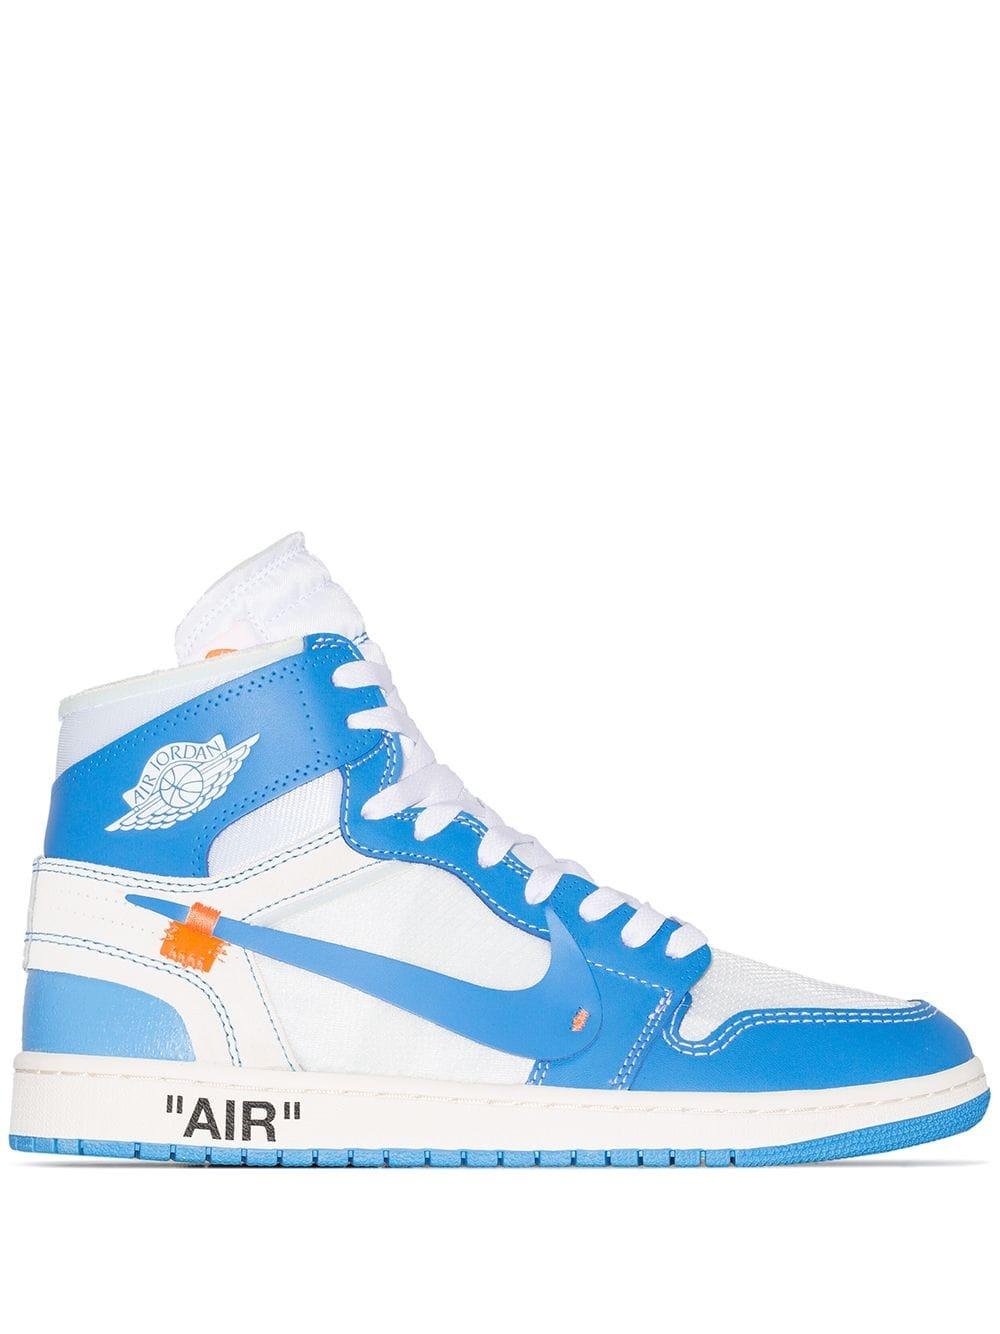 Air jordan 1 leather high trainers Nike x Off-White Blue size 12